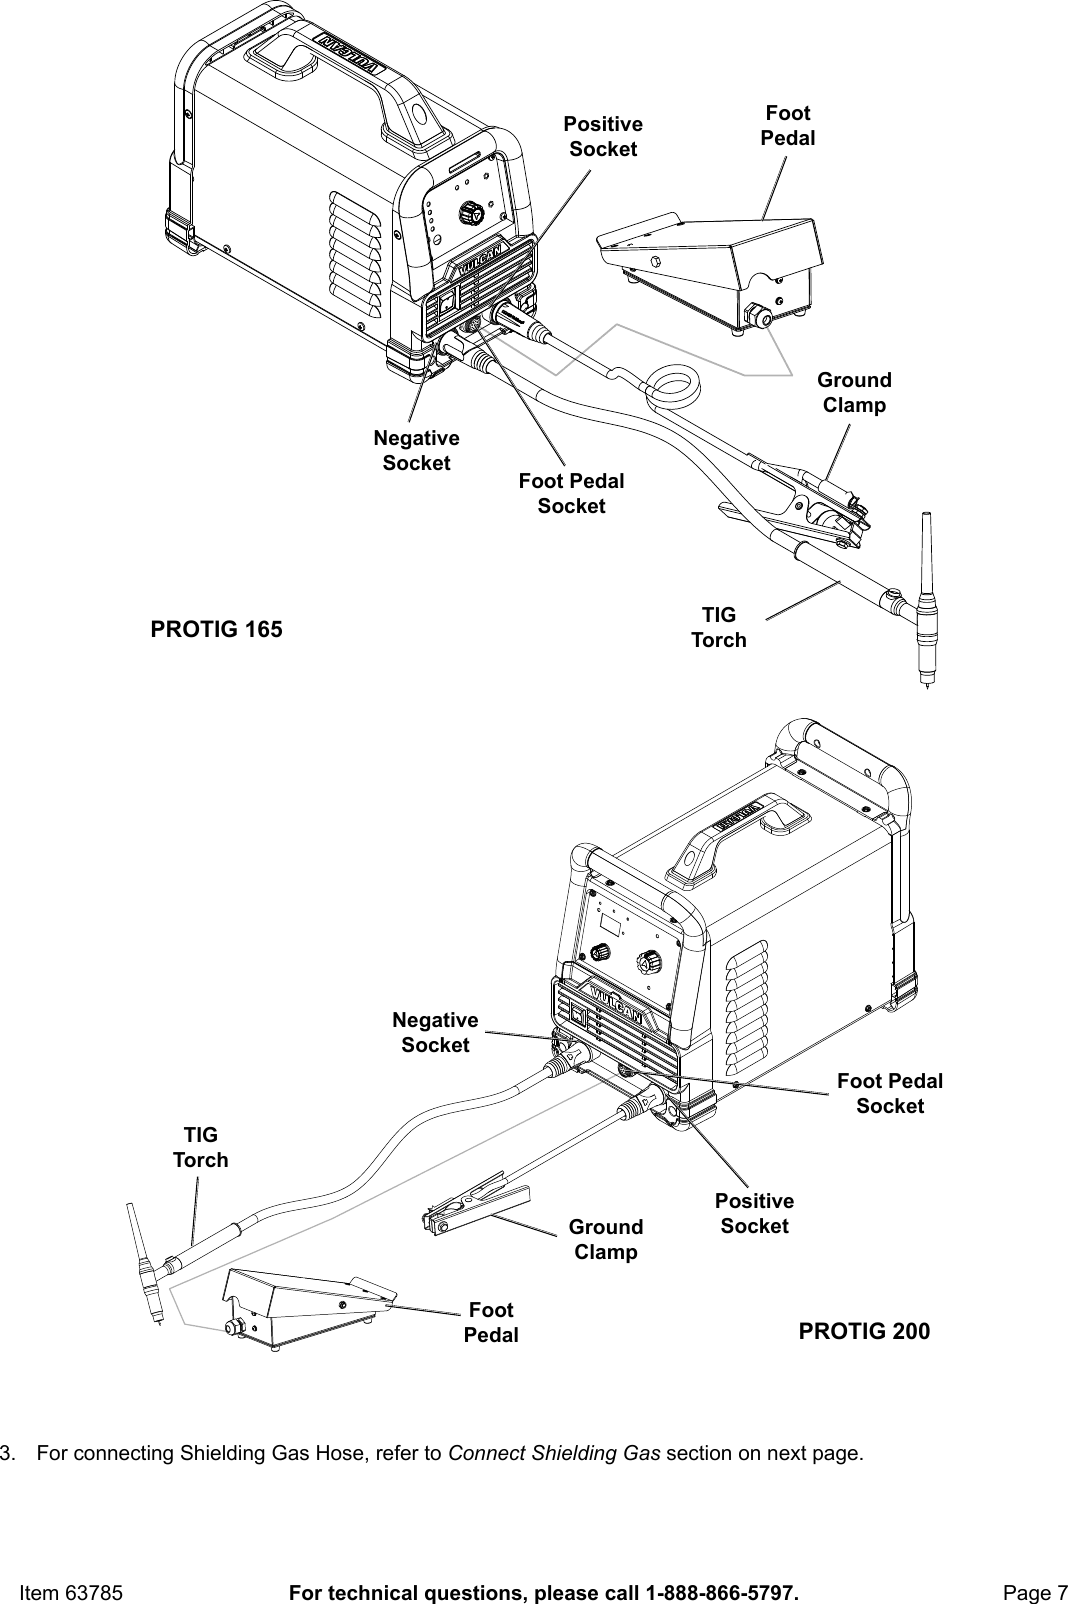 Page 7 of 12 - Manual For The 63785 150A TIG Torch